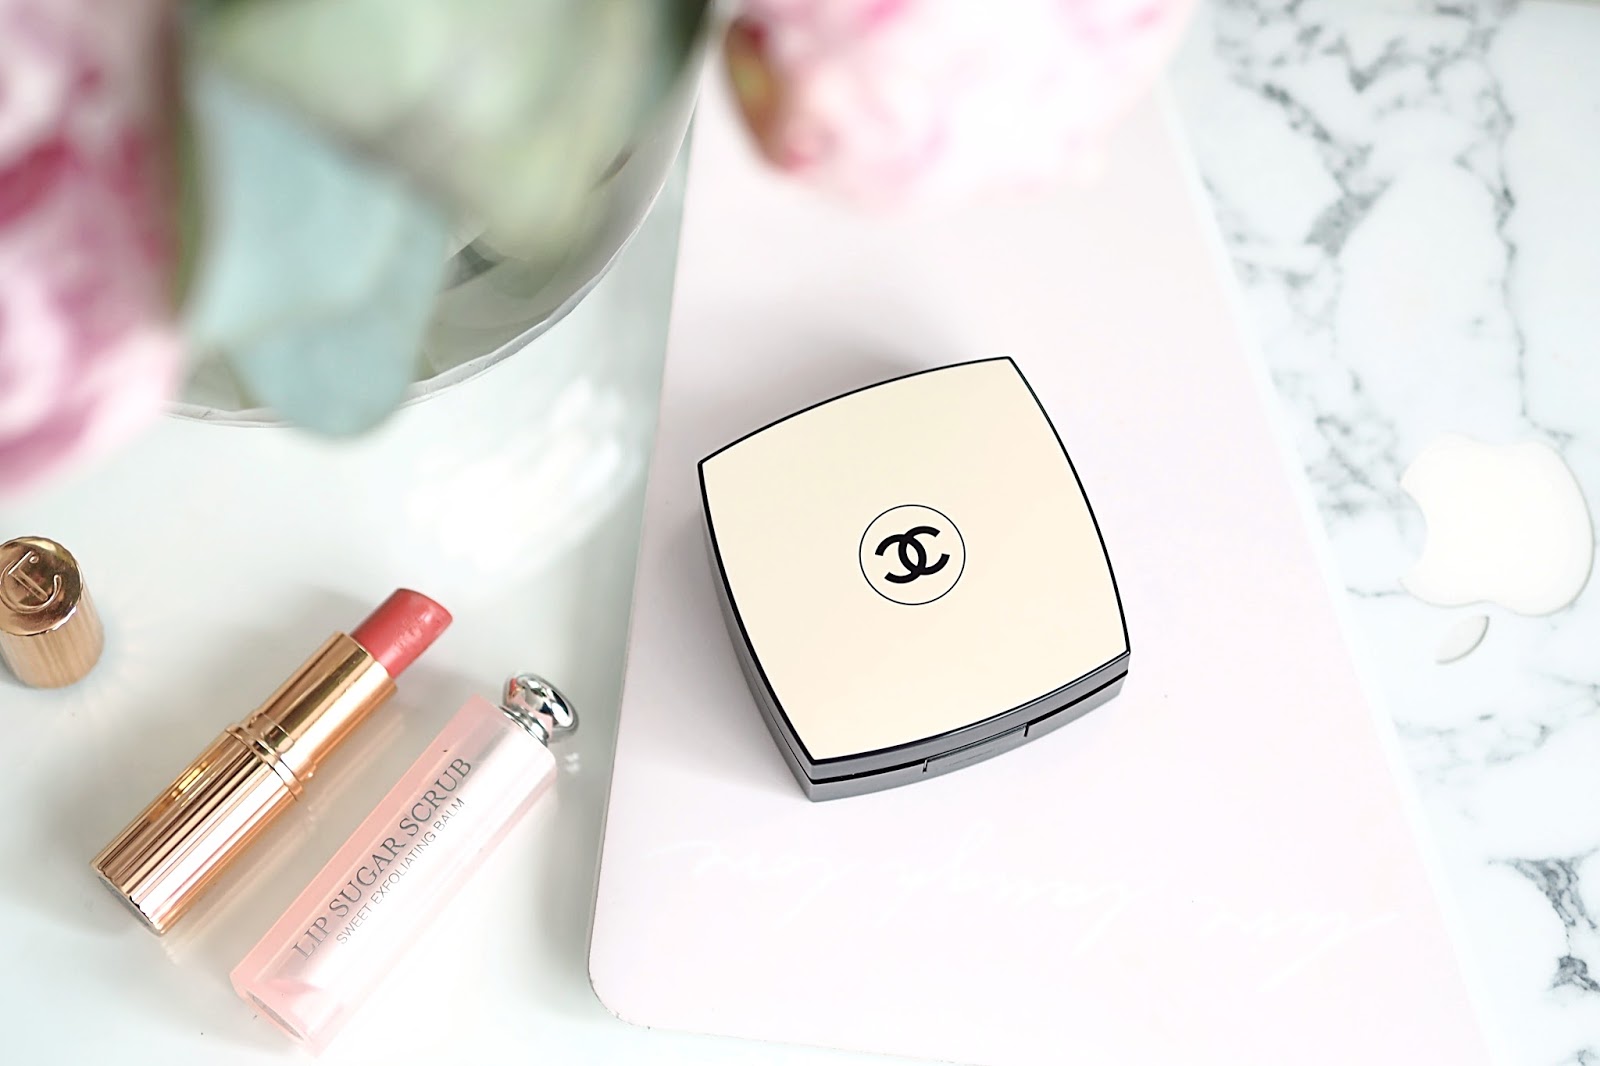 The Chanel Les Beiges Healthy Glow Gel Touch Foundation